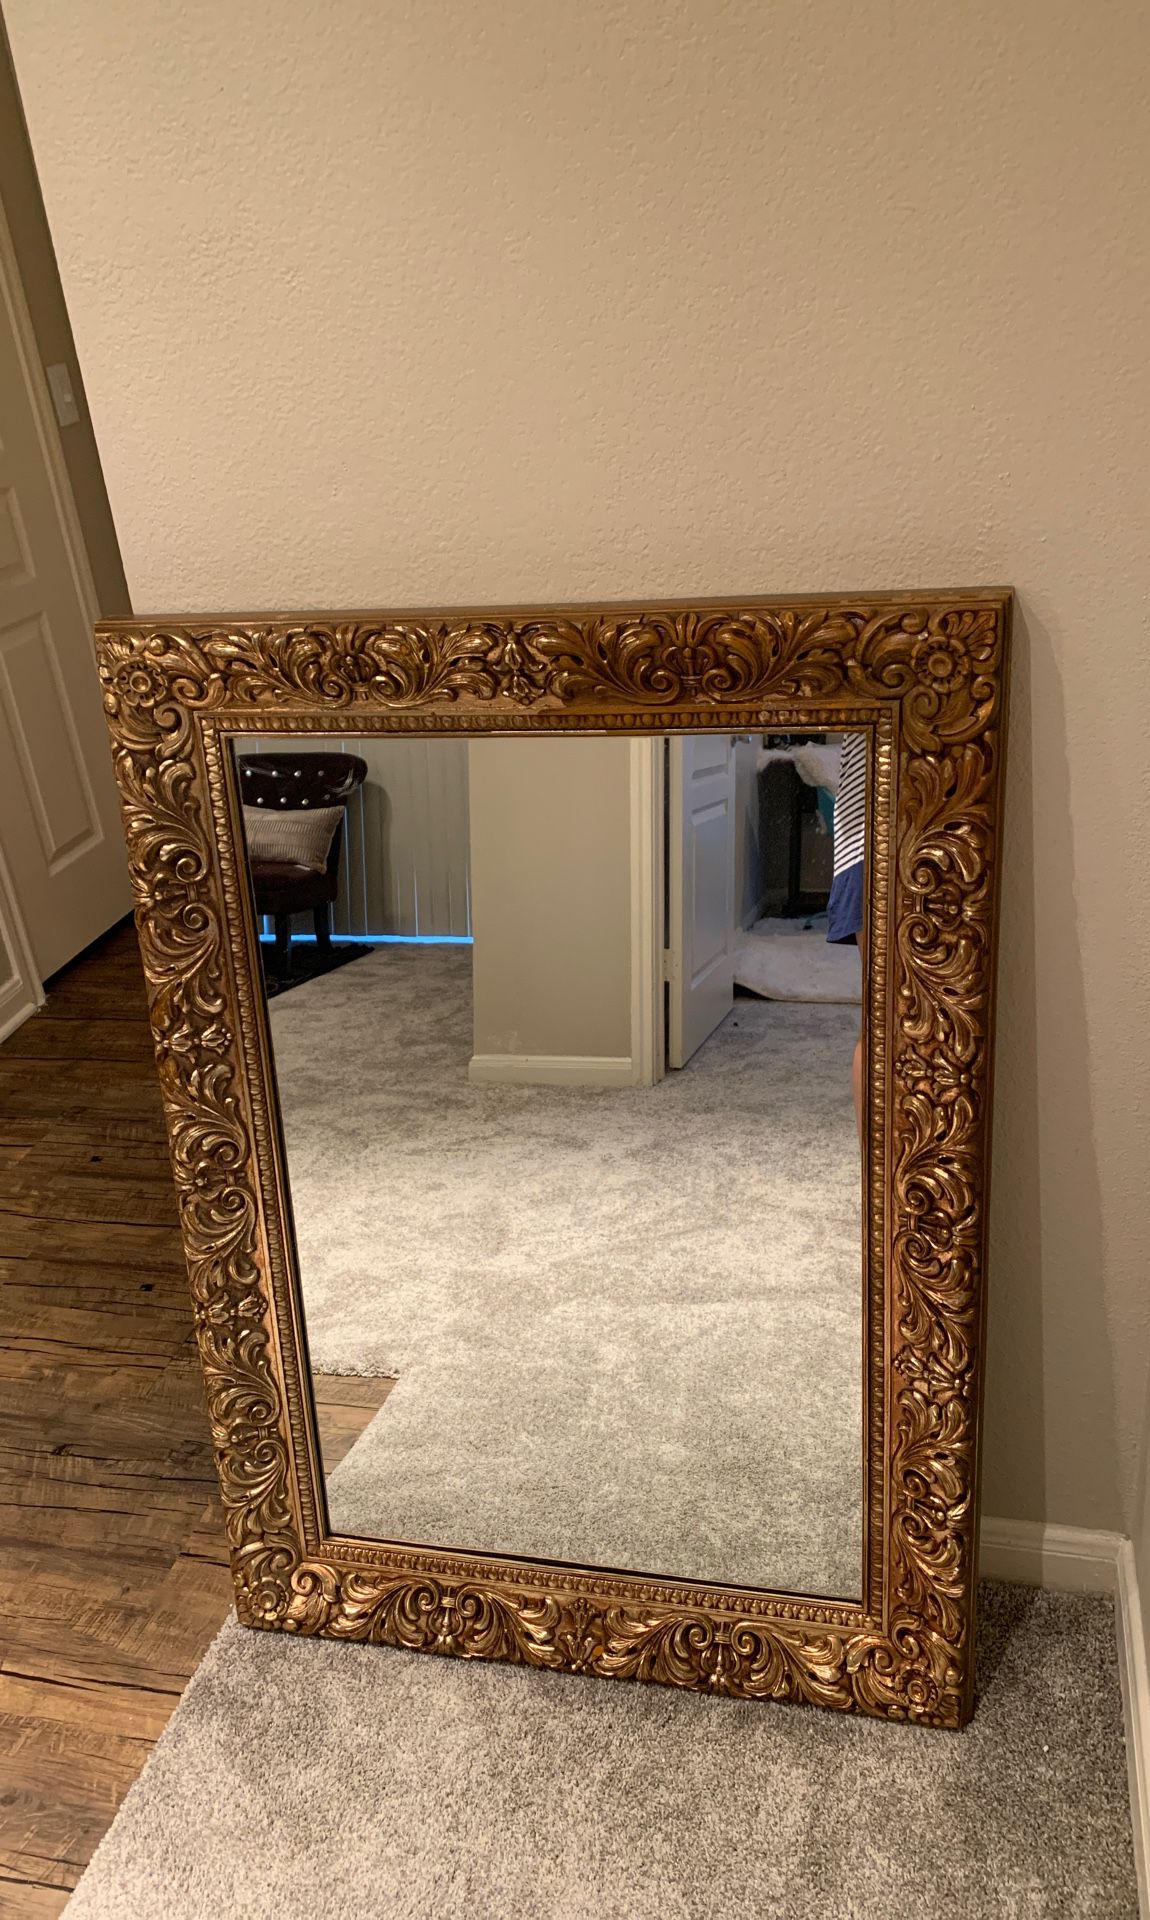 Beautiful Gold framed mirror, I moving so need gone ASAP bought it for 350 but asking for 200 SERIOUS INQUIRIES ONLY! Heavy weight!!